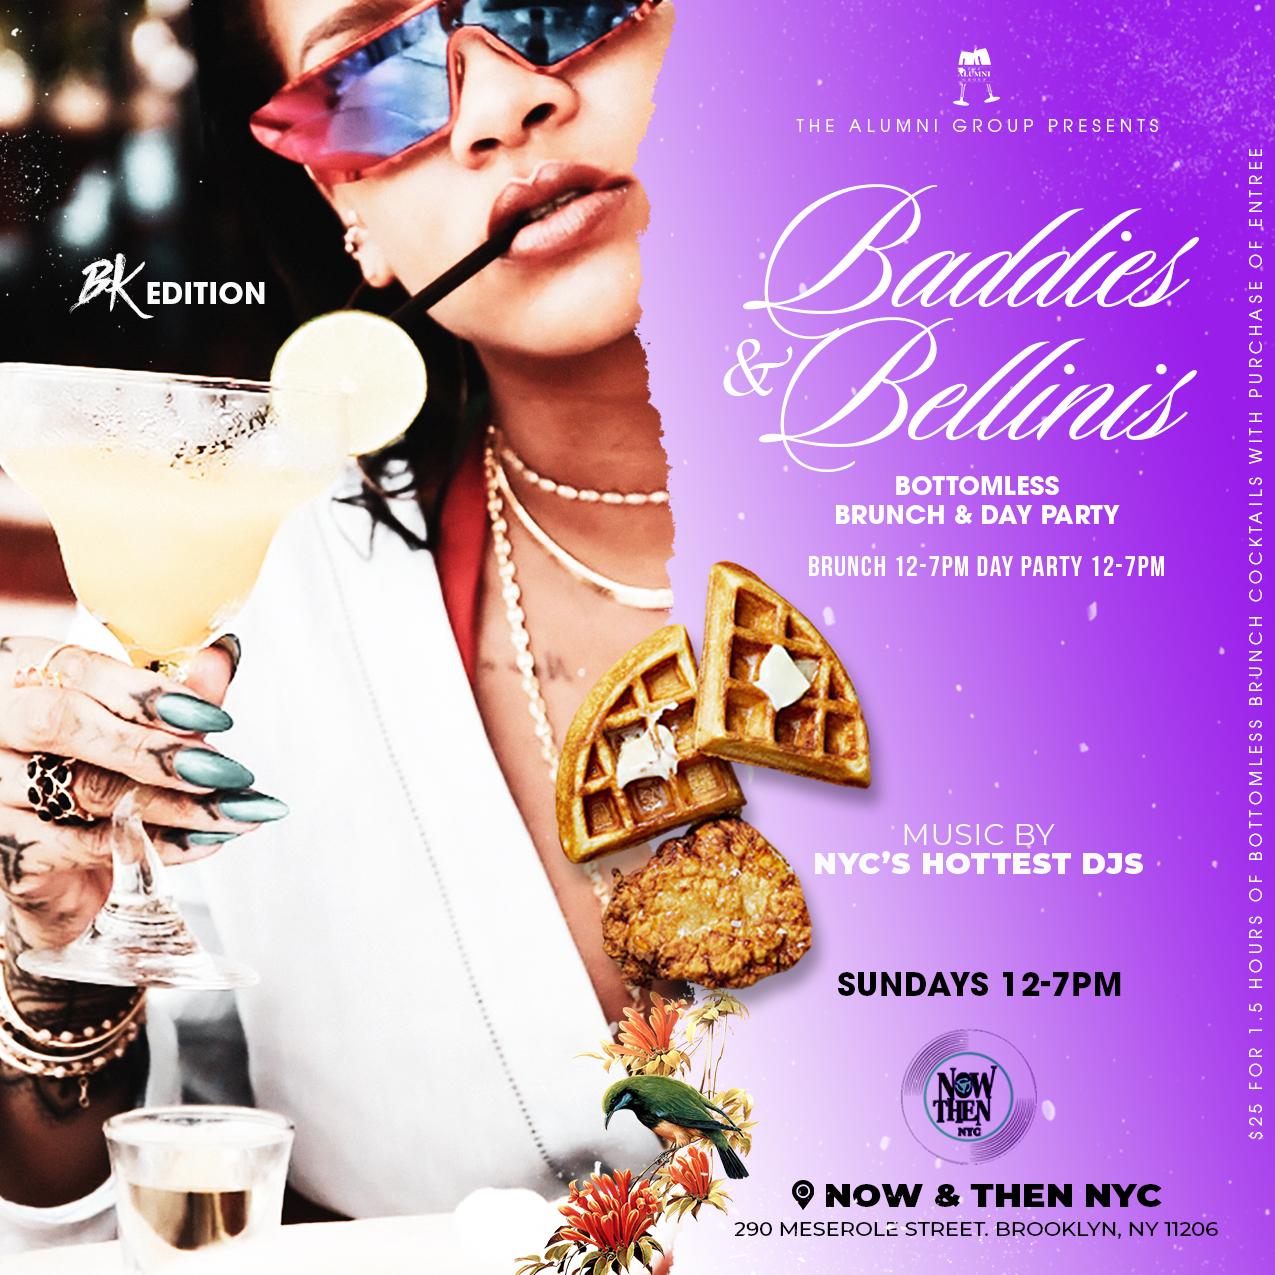 Baddies & Bellinis - Bottomless Brunch & Day Party BK Edition